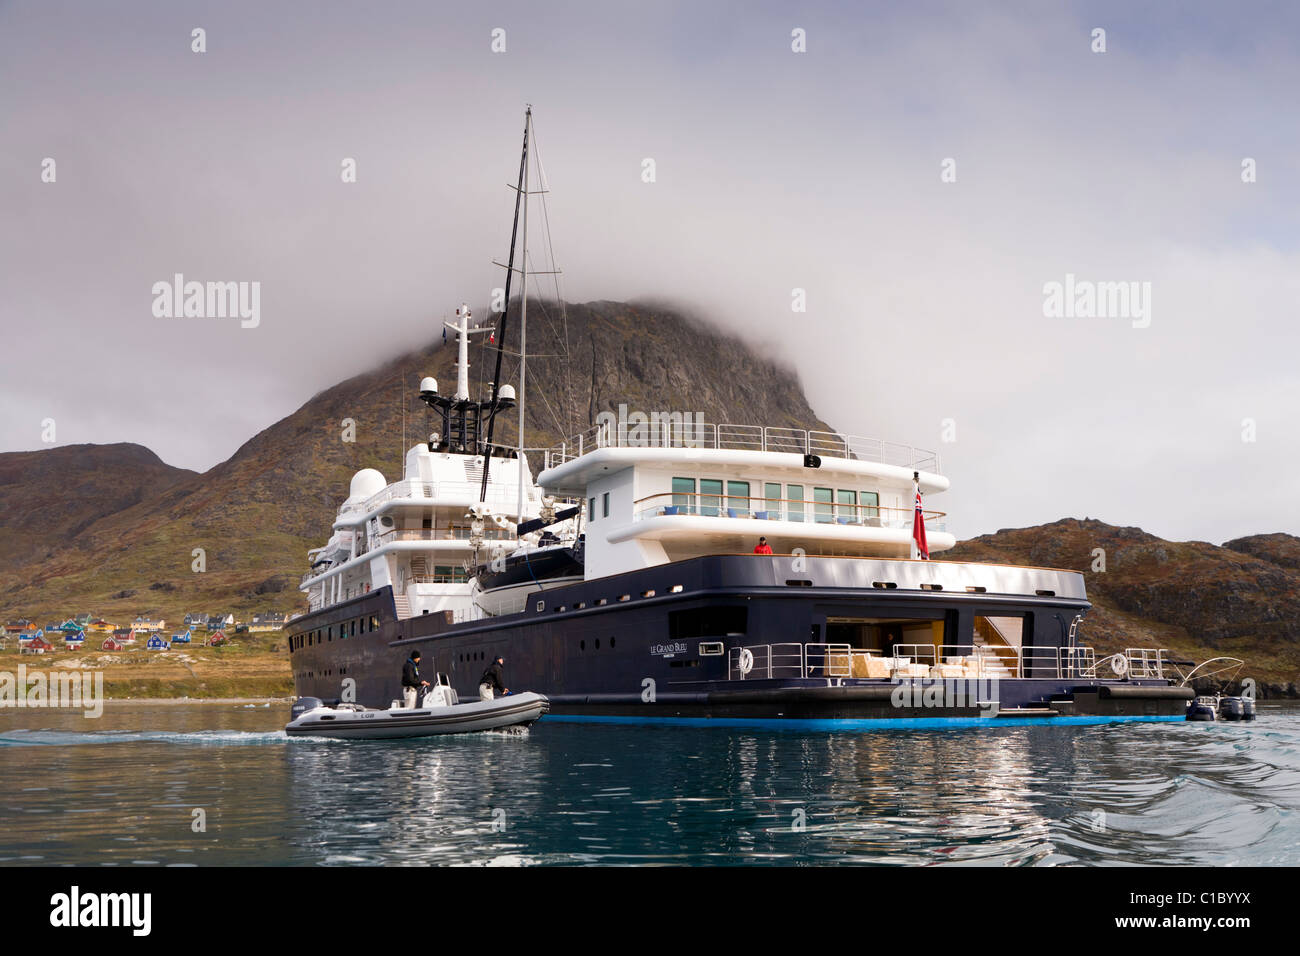 Luxury private yacht Le Grand Bleu guarded by security guards on a Zodiac. In the fjord outside Narsaq, South Greenland Stock Photo